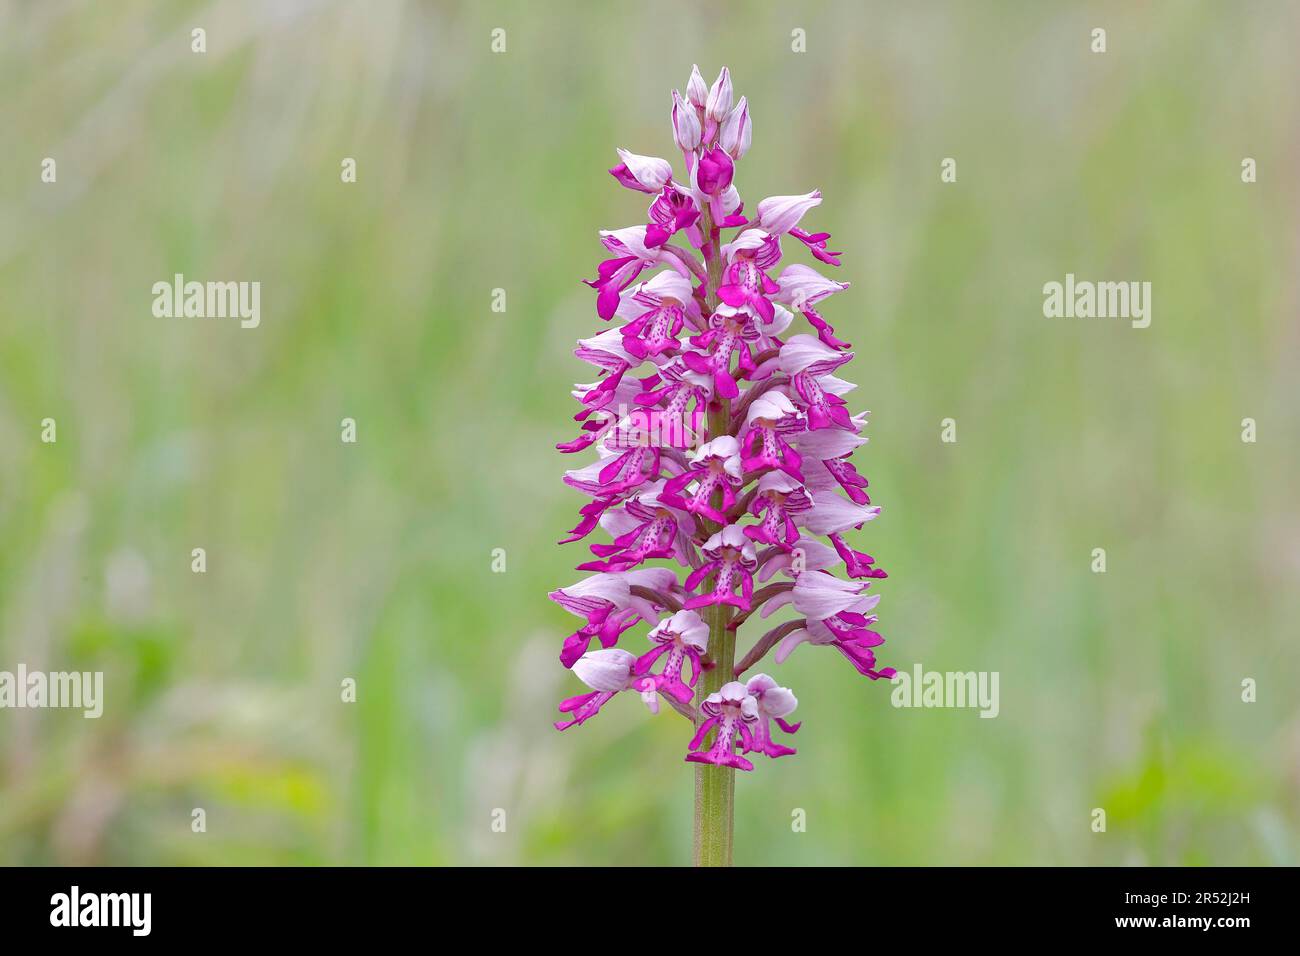 Flower of the helmet orchid (Orchis militaris) (Orchidaceae), blooming in a meadow, orchid, Lake Neusiedl, Burgenland, Austria Stock Photo